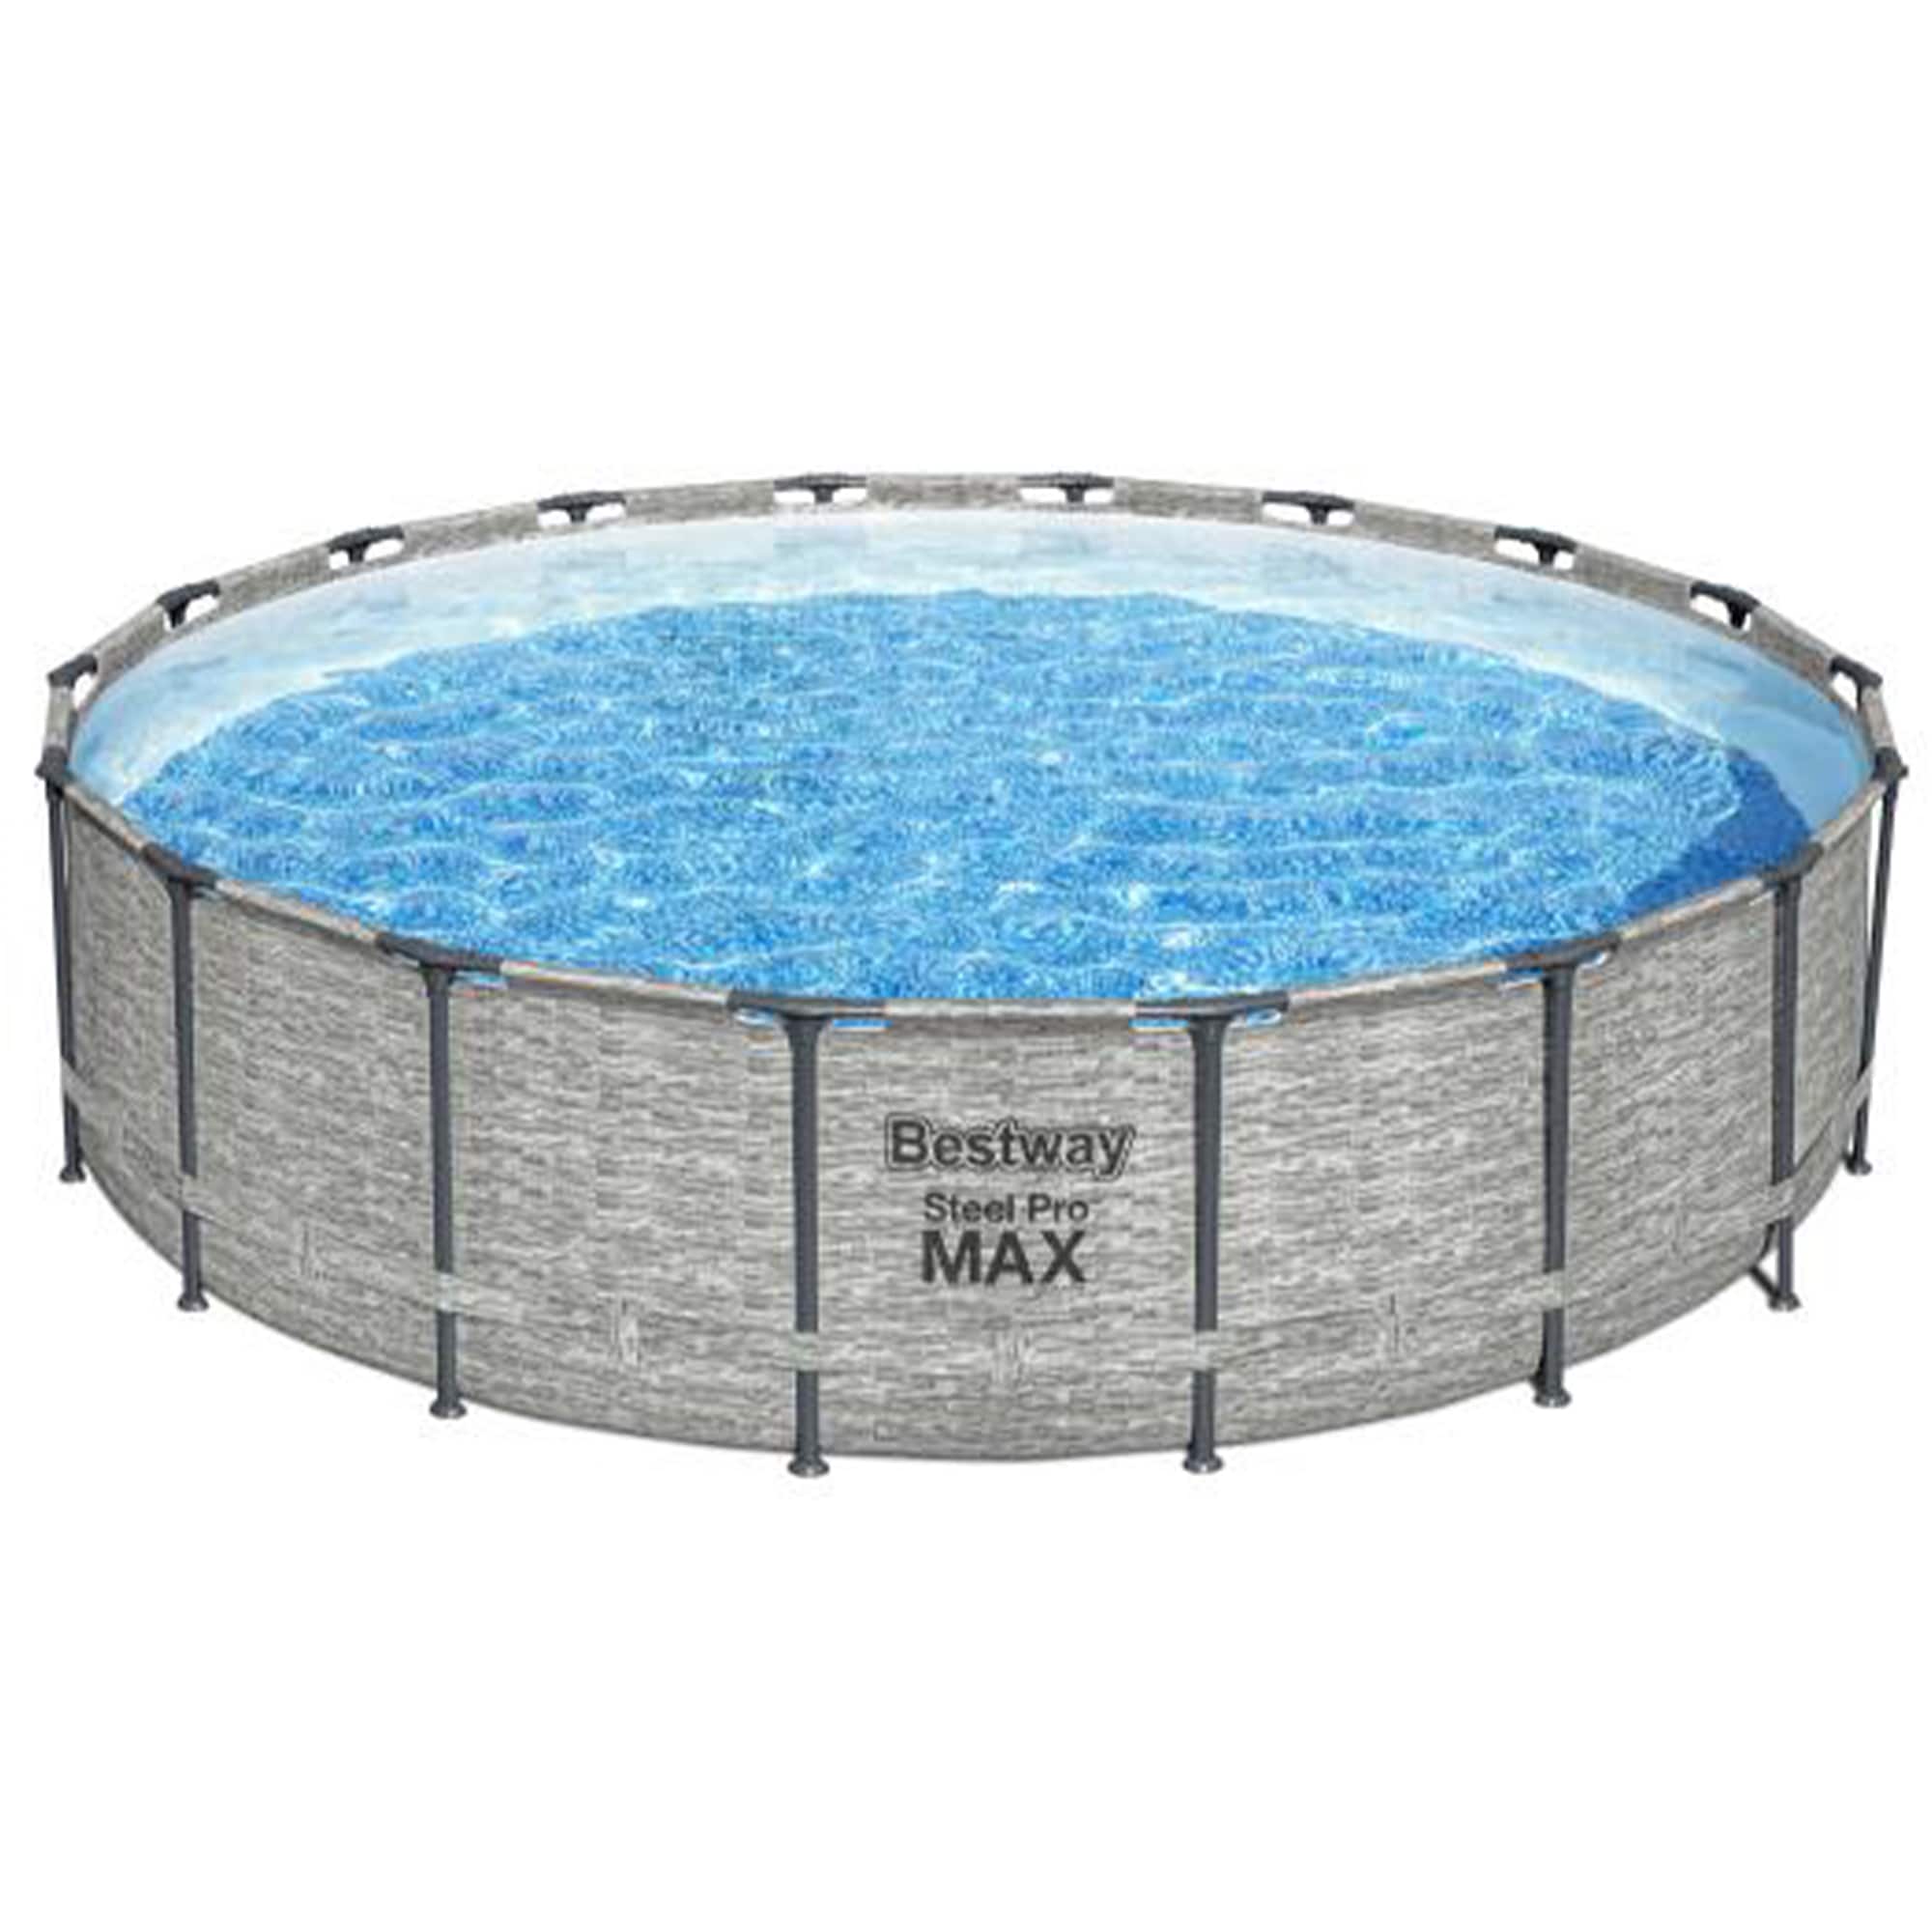 Bestway 18-ft 18-ft x 48-in Round Above-Ground Pool in Above-Ground Pools department at Lowes.com